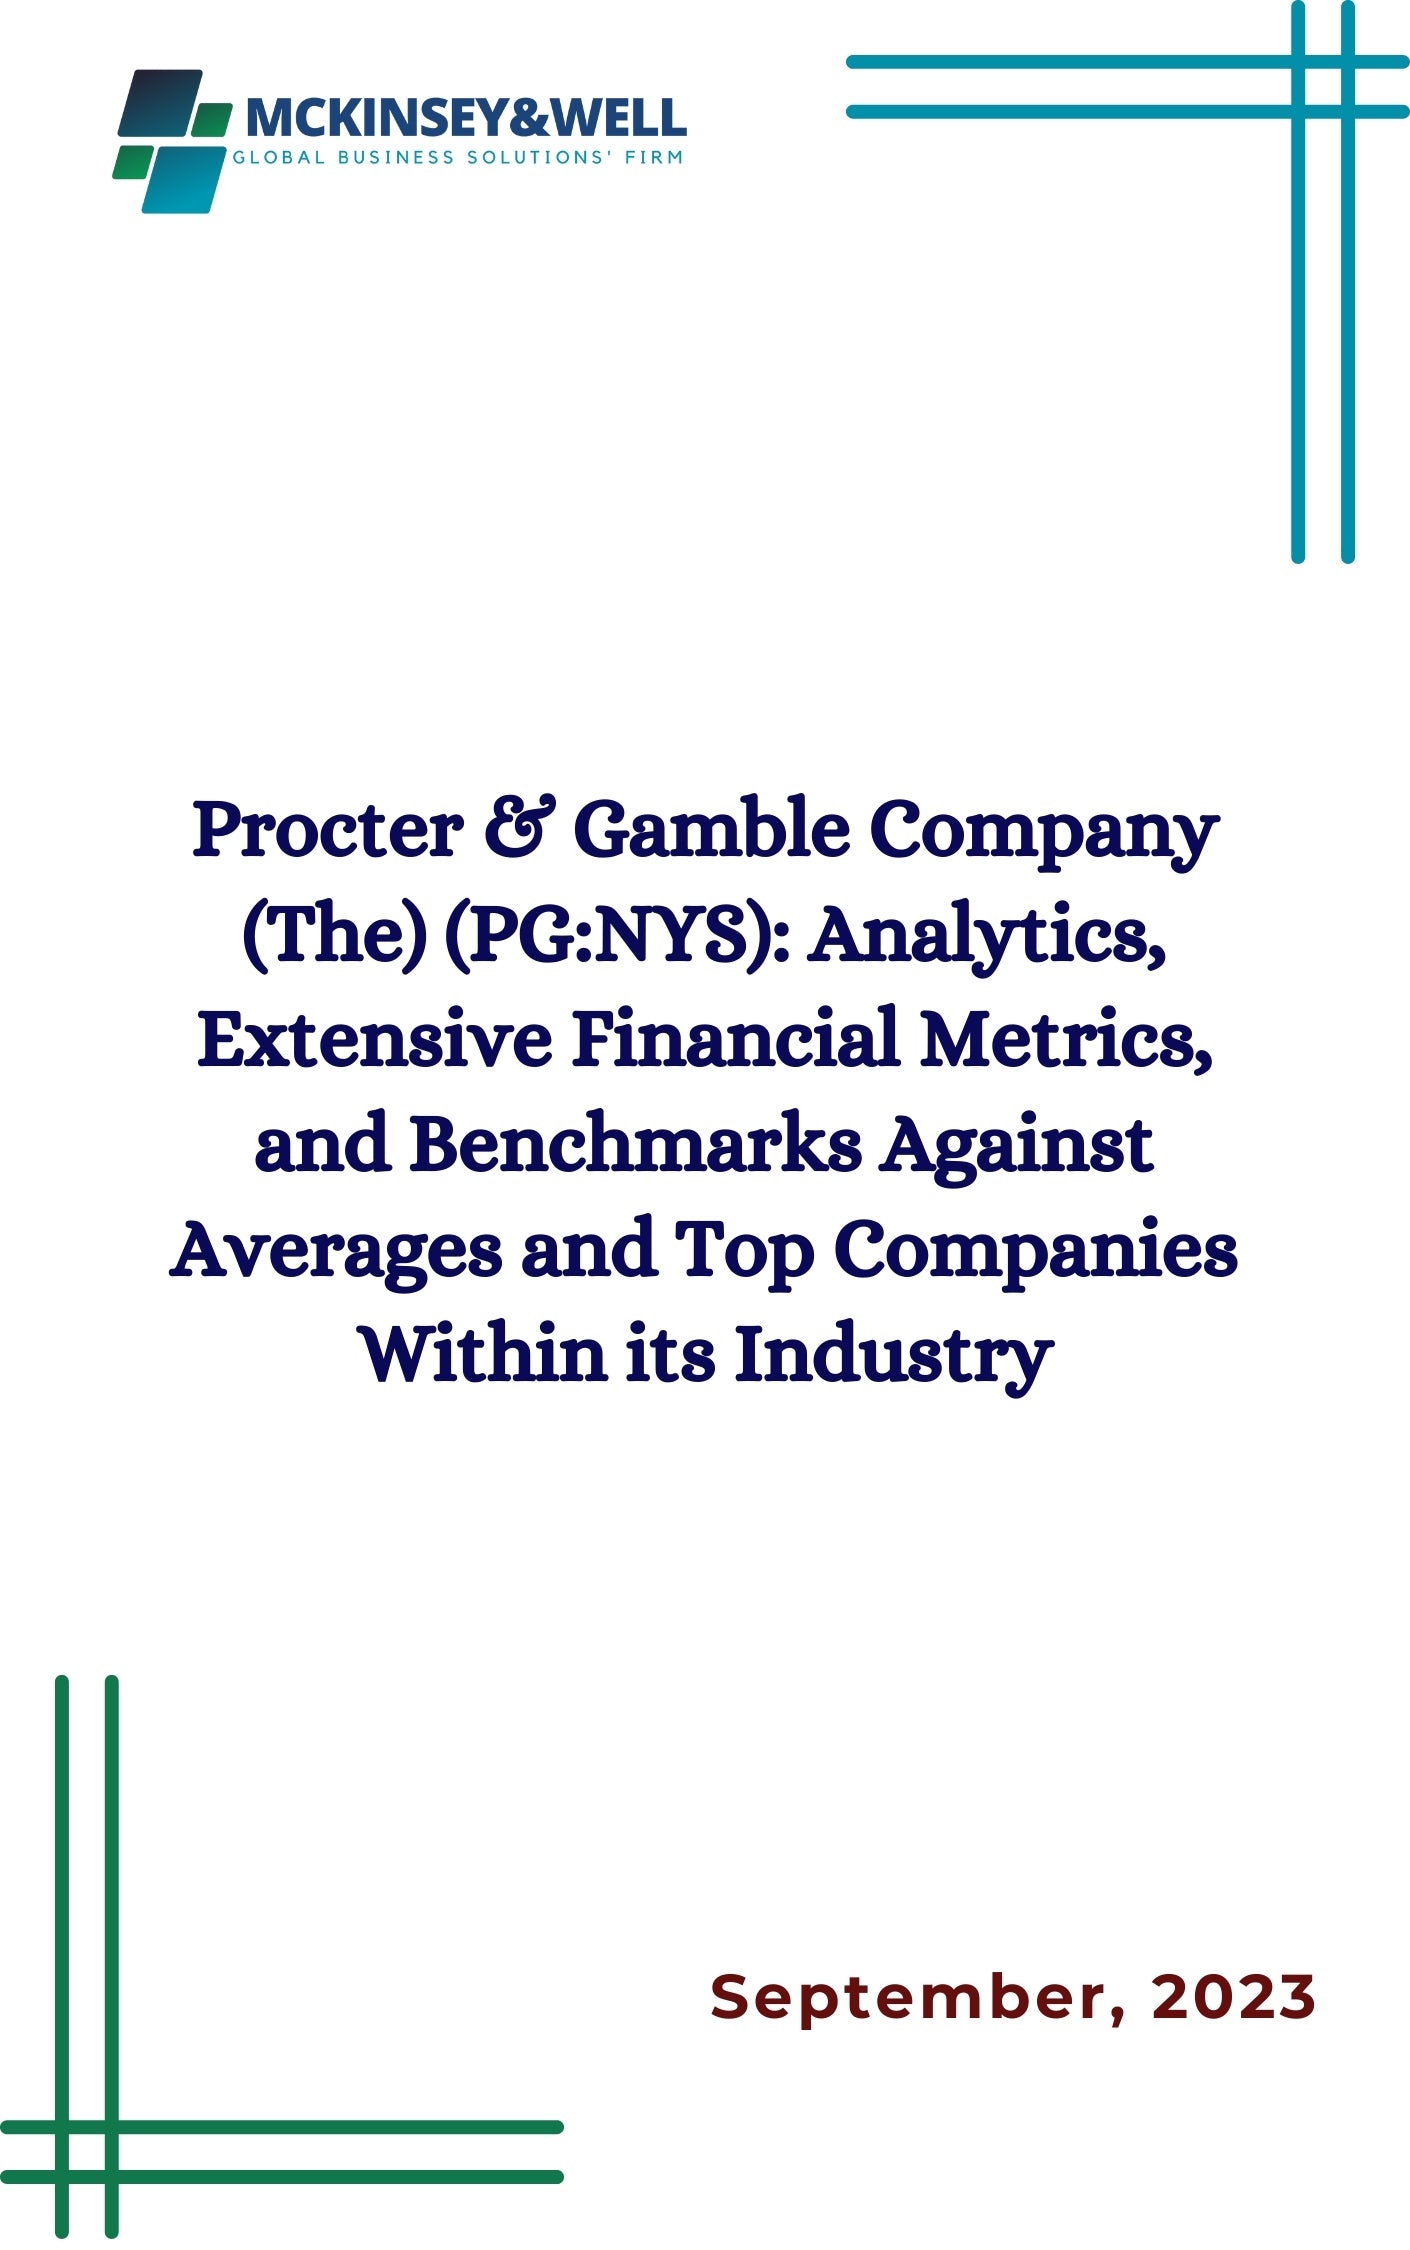 Procter & Gamble Company (The) (PG:NYS): Analytics, Extensive Financial Metrics, and Benchmarks Against Averages and Top Companies Within its Industry